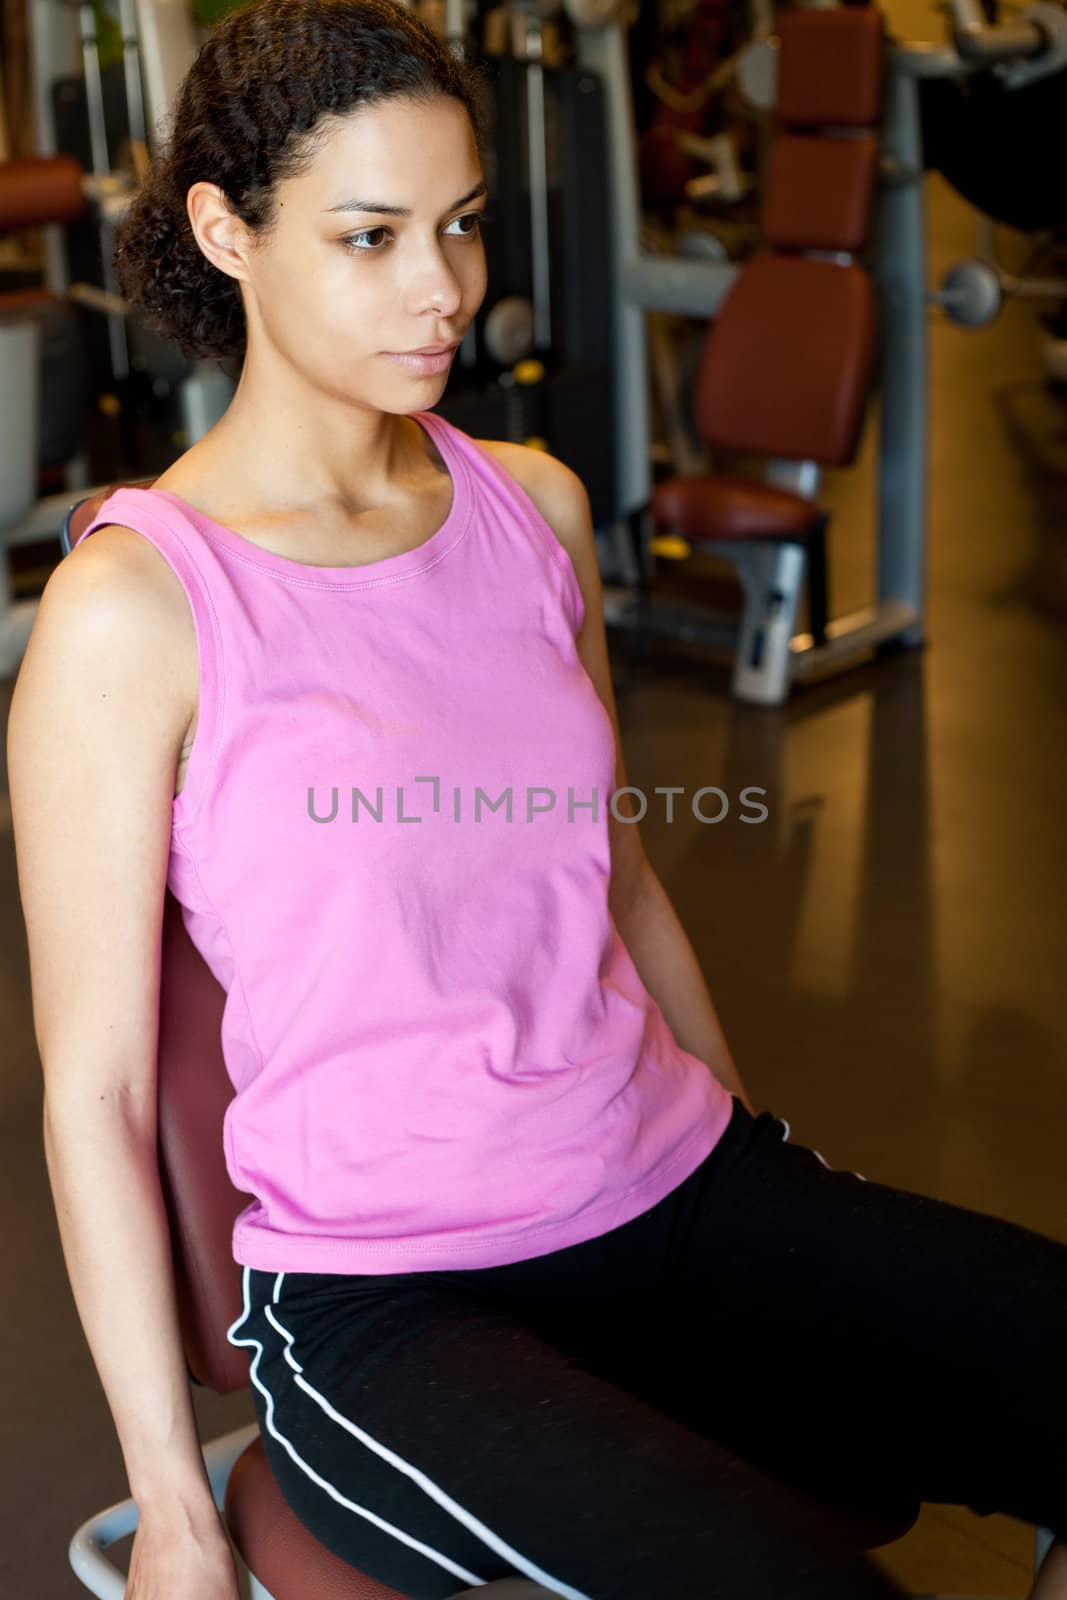 Pretty girl working out in the gym